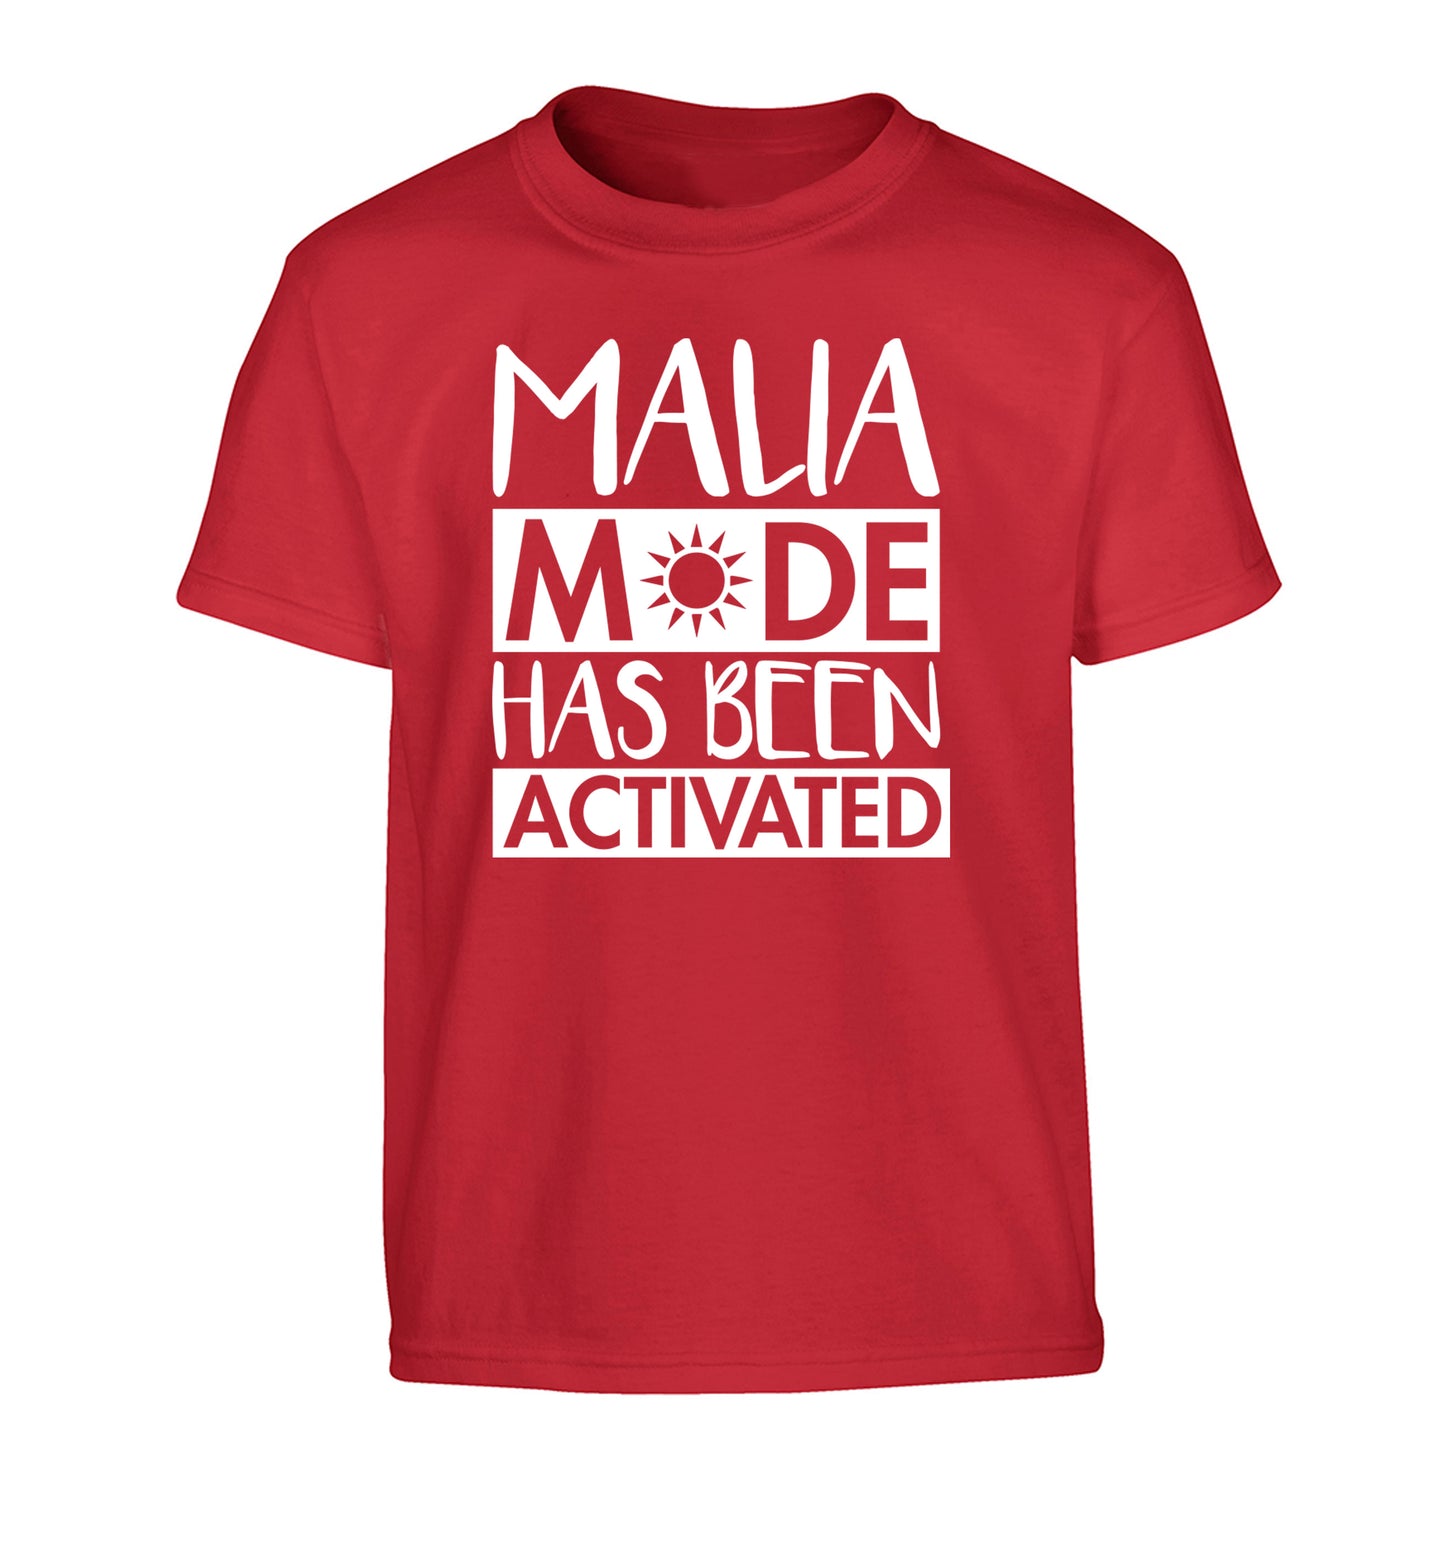 Malia mode has been activated Children's red Tshirt 12-13 Years